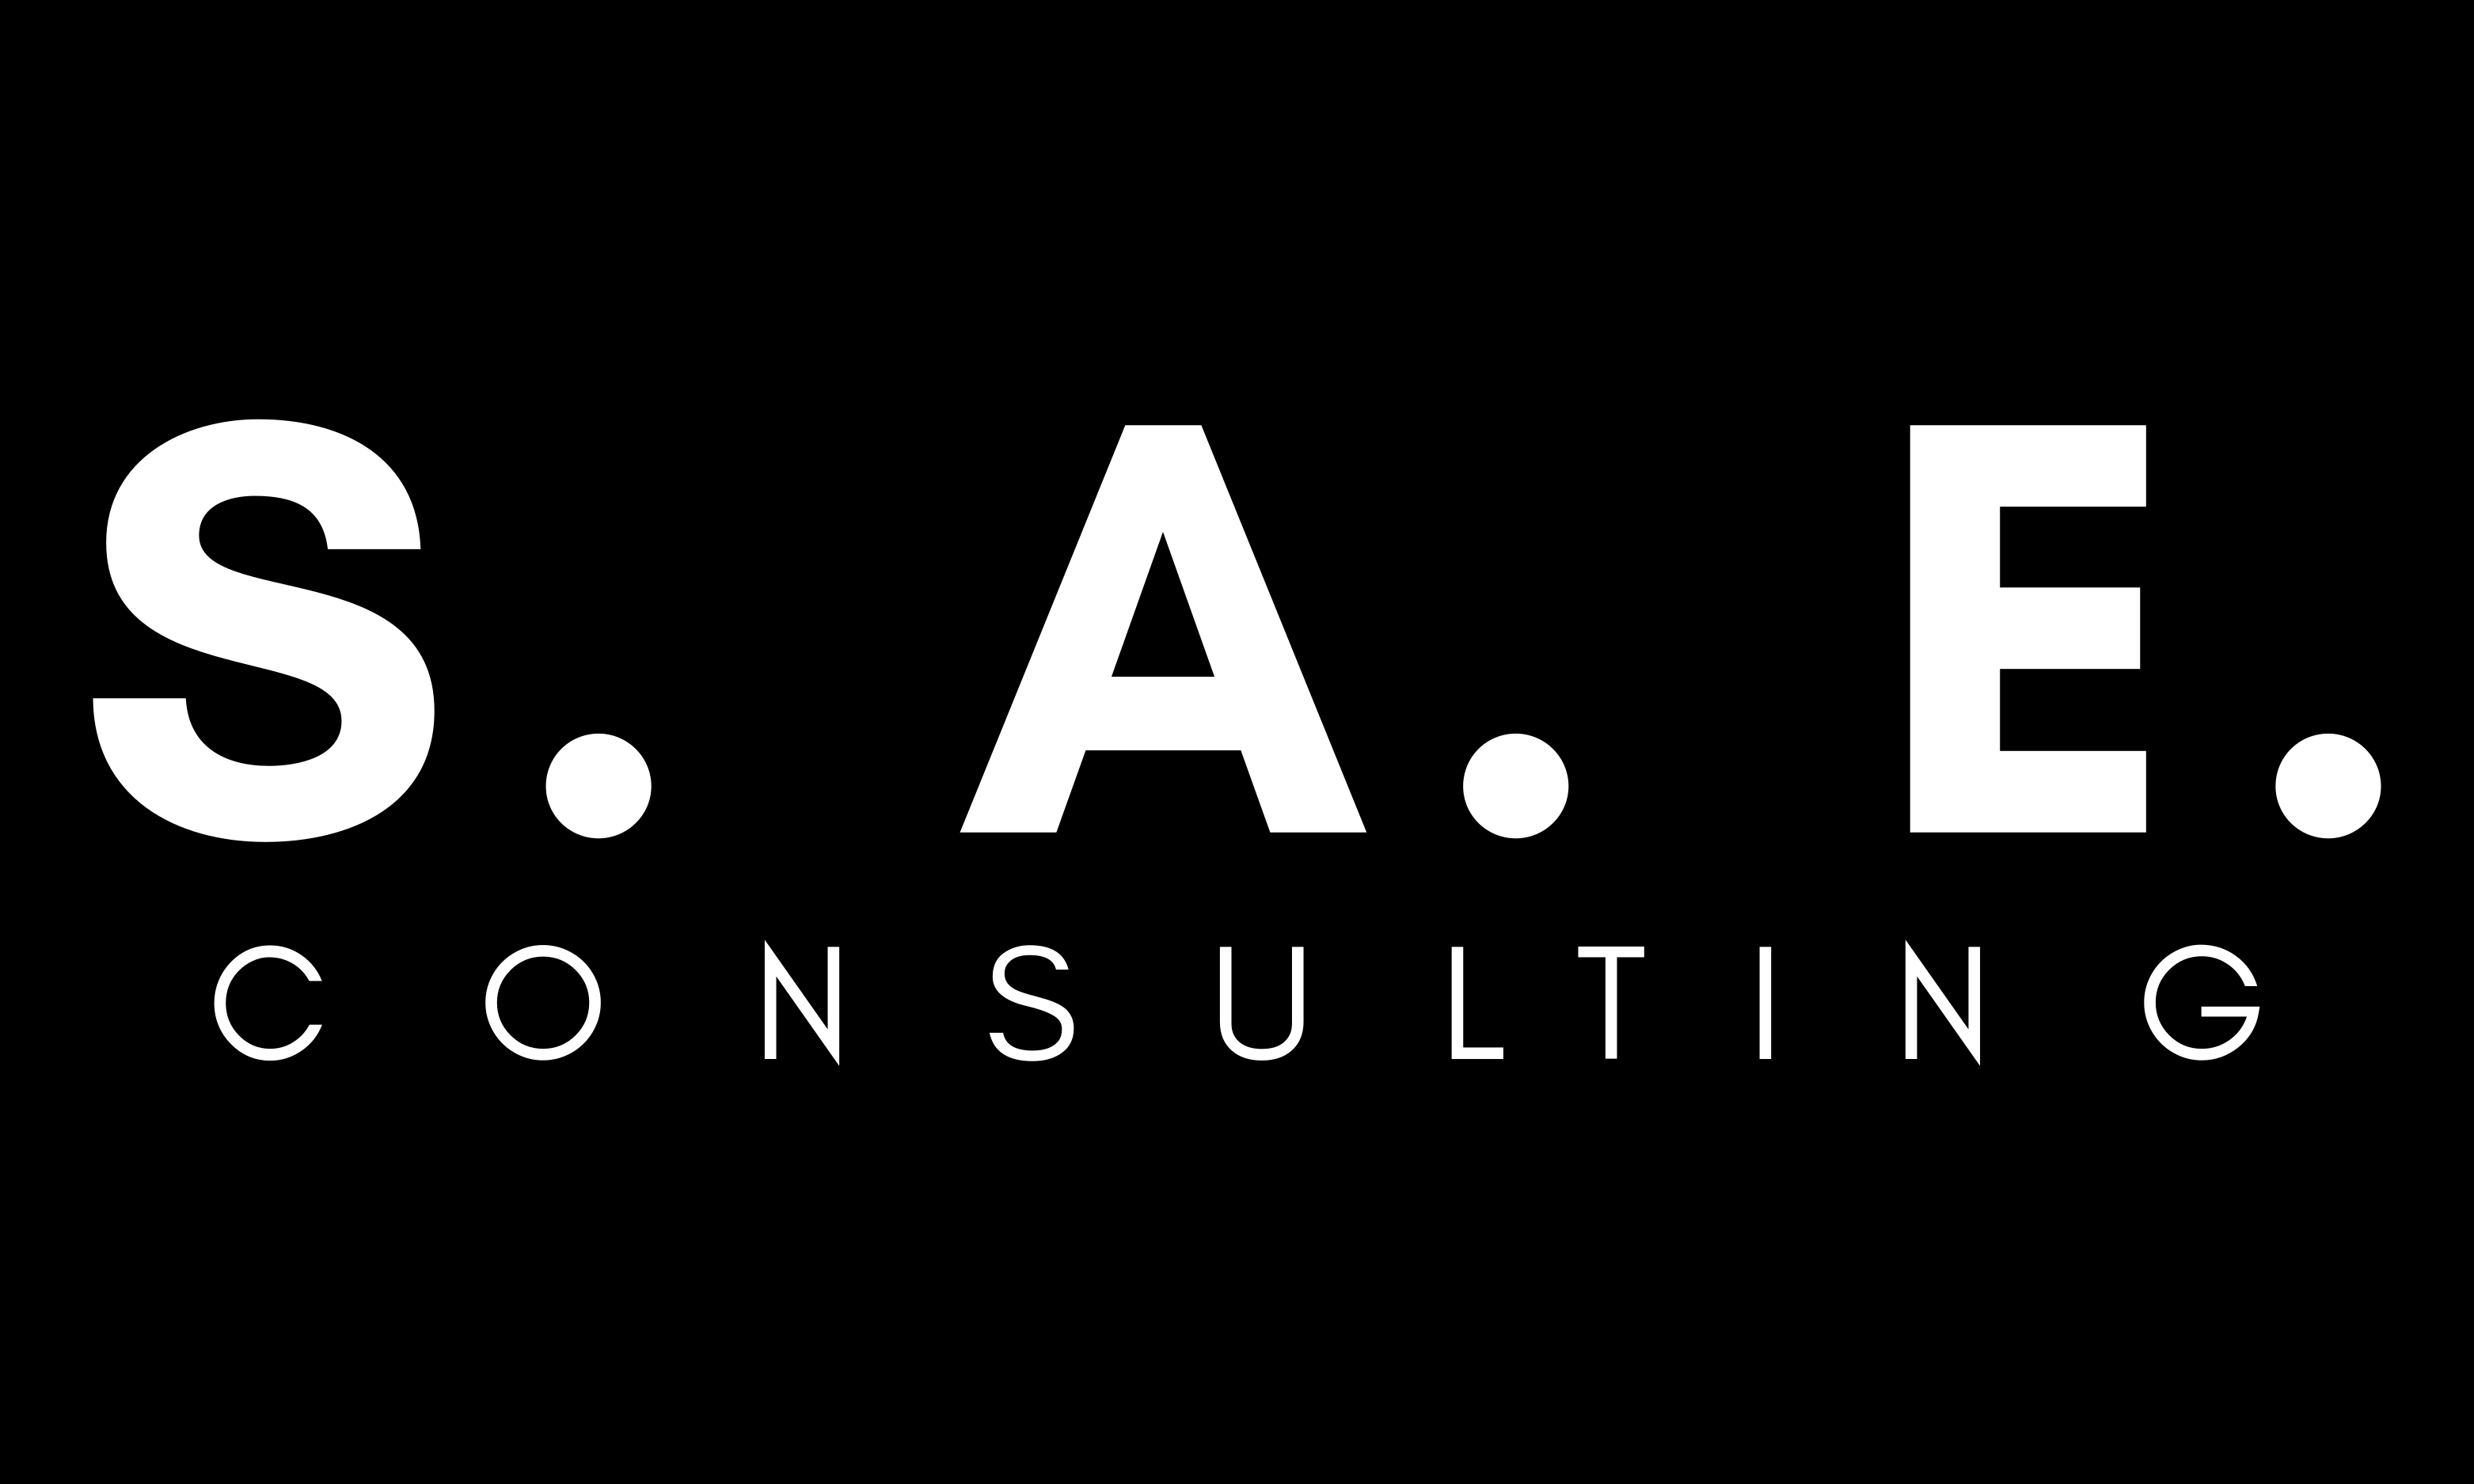 SAE Consulting